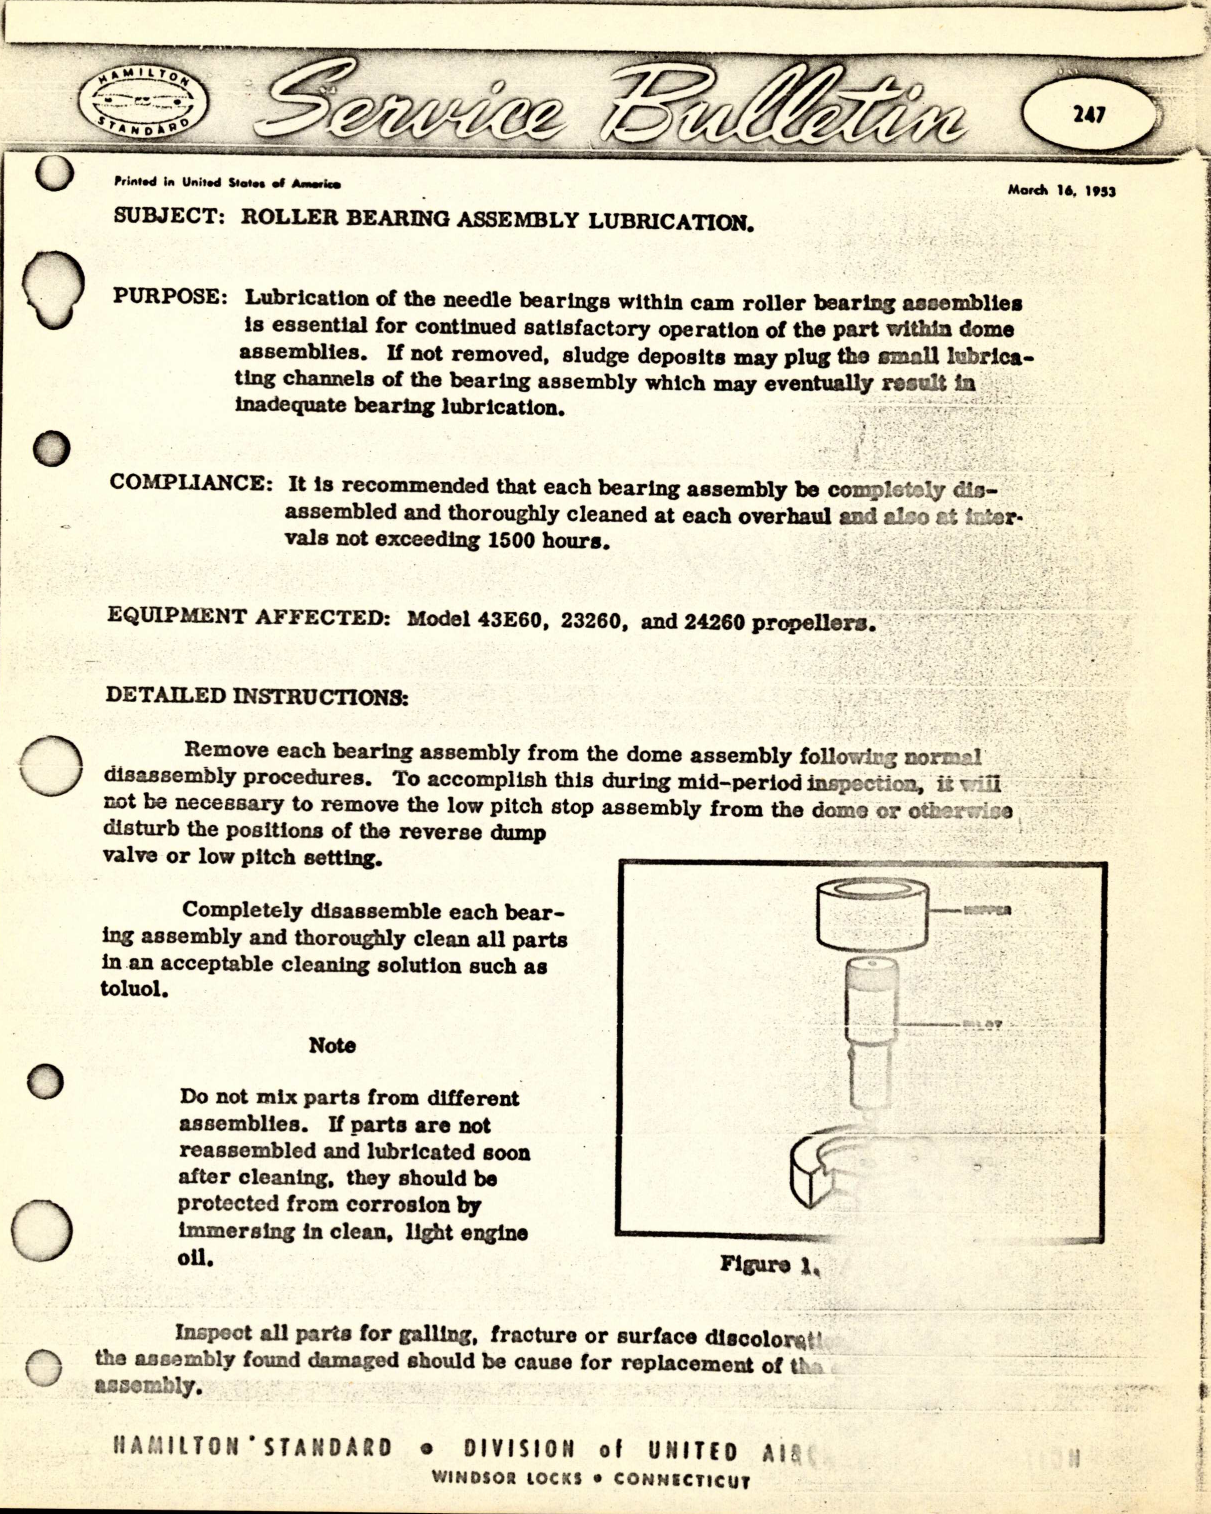 Sample page 1 from AirCorps Library document: Roller Bearing Assembly Lubrication